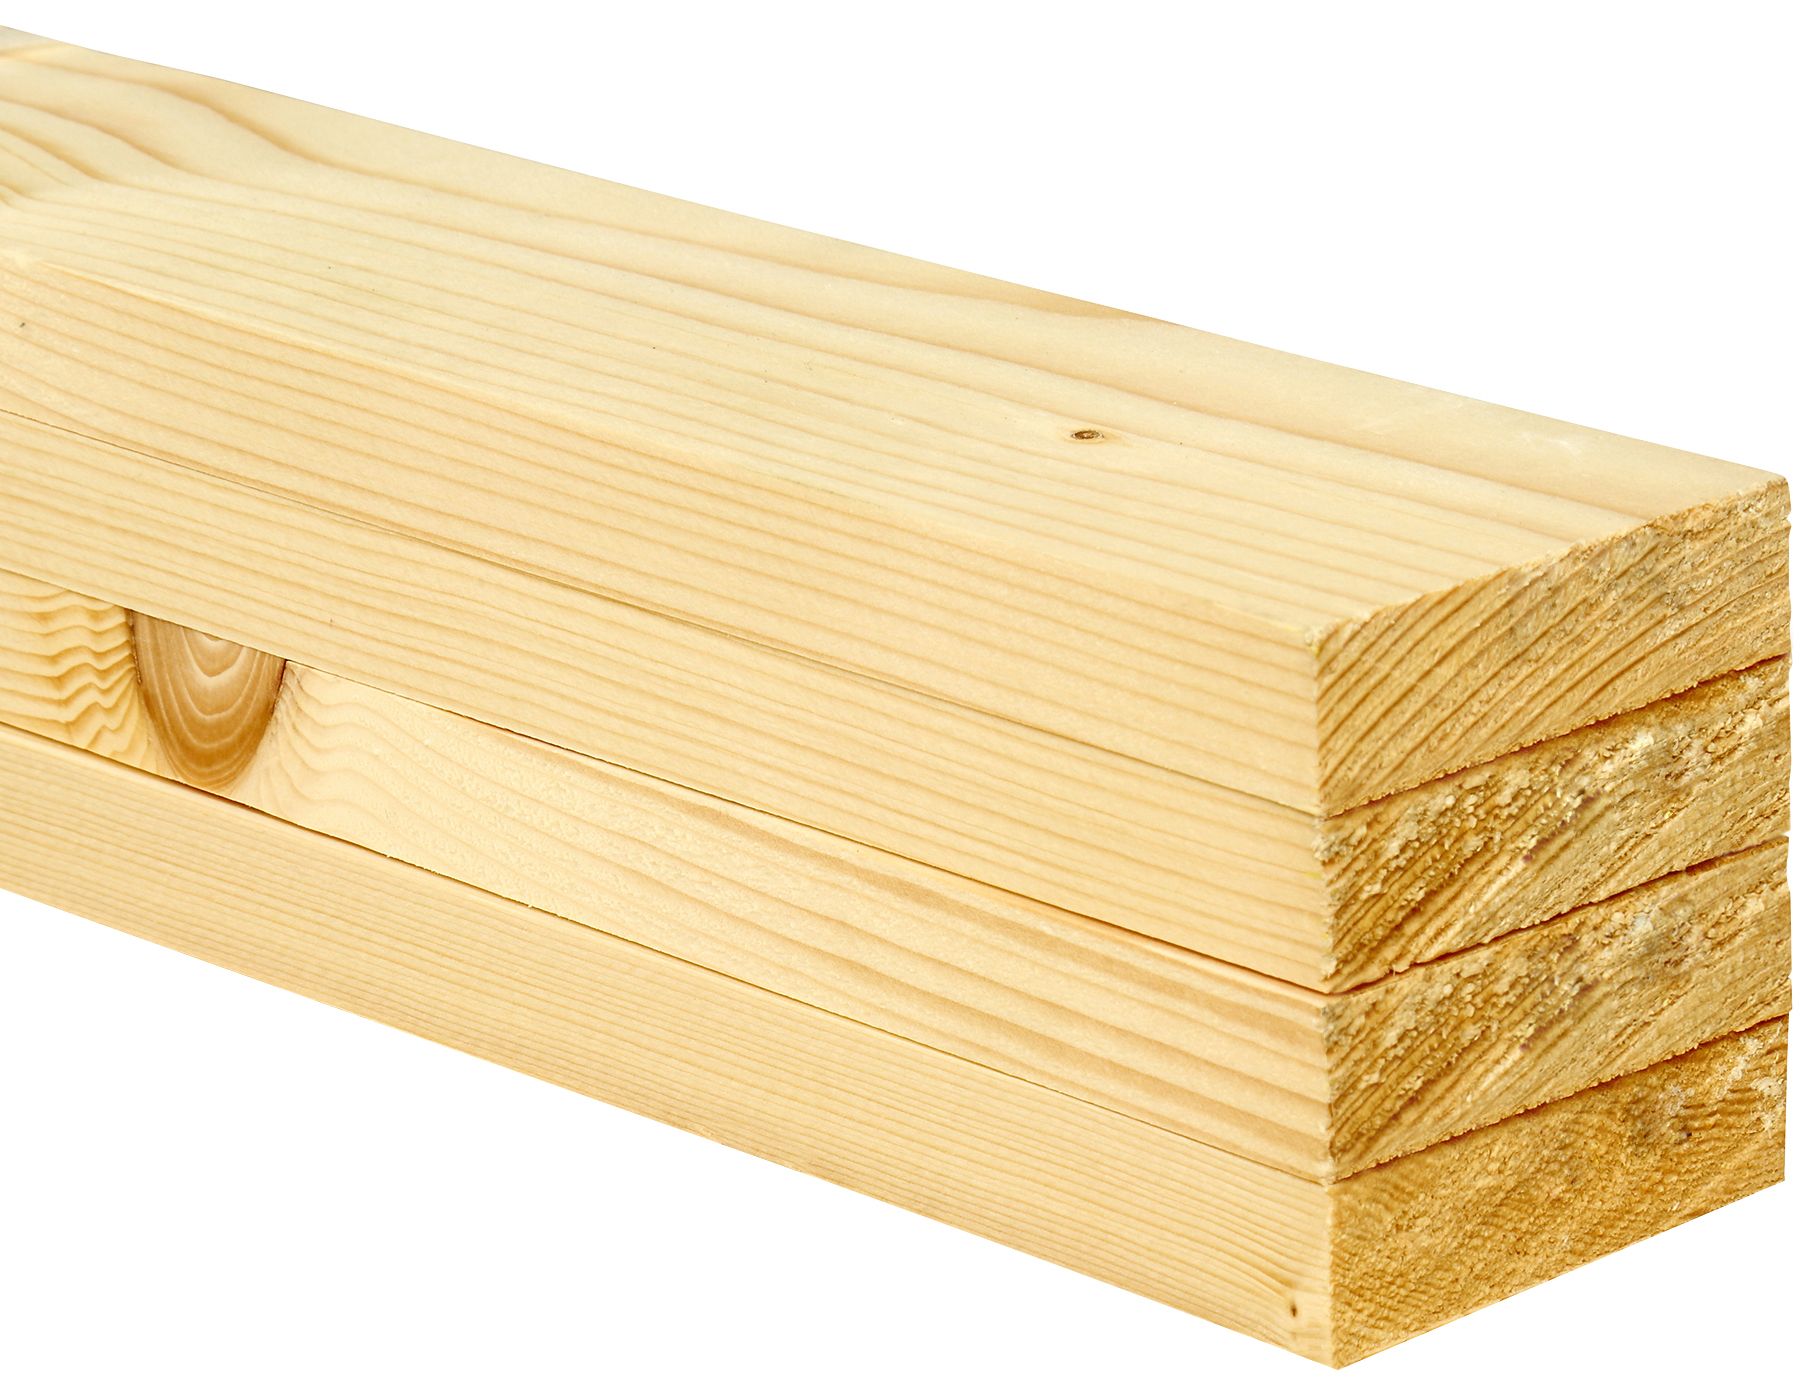 Image of Wickes Whitewood PSE Timber - 18 x 69 x 2400mm - Pack of 4